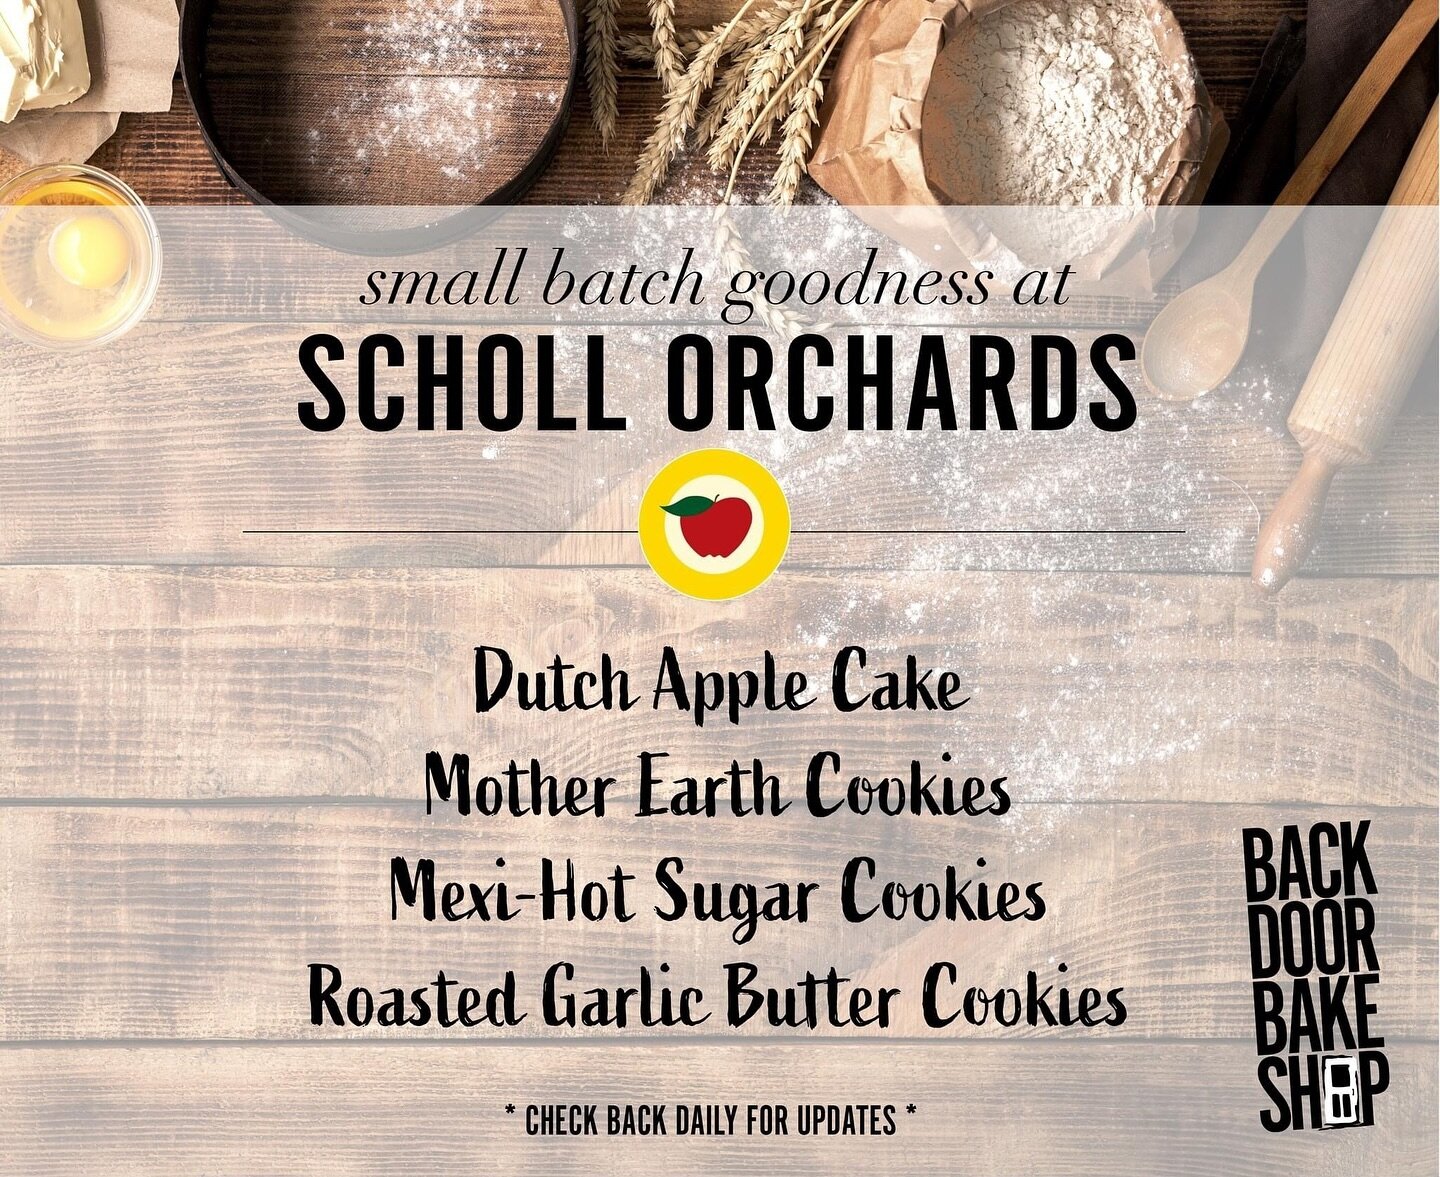 Thu-Sat at @schollorchards 
- Dutch Apple Cake 
- Mother Earth Cookies
- Mexi-Hot Cookies
- Roasted Garlic Butter Cookies